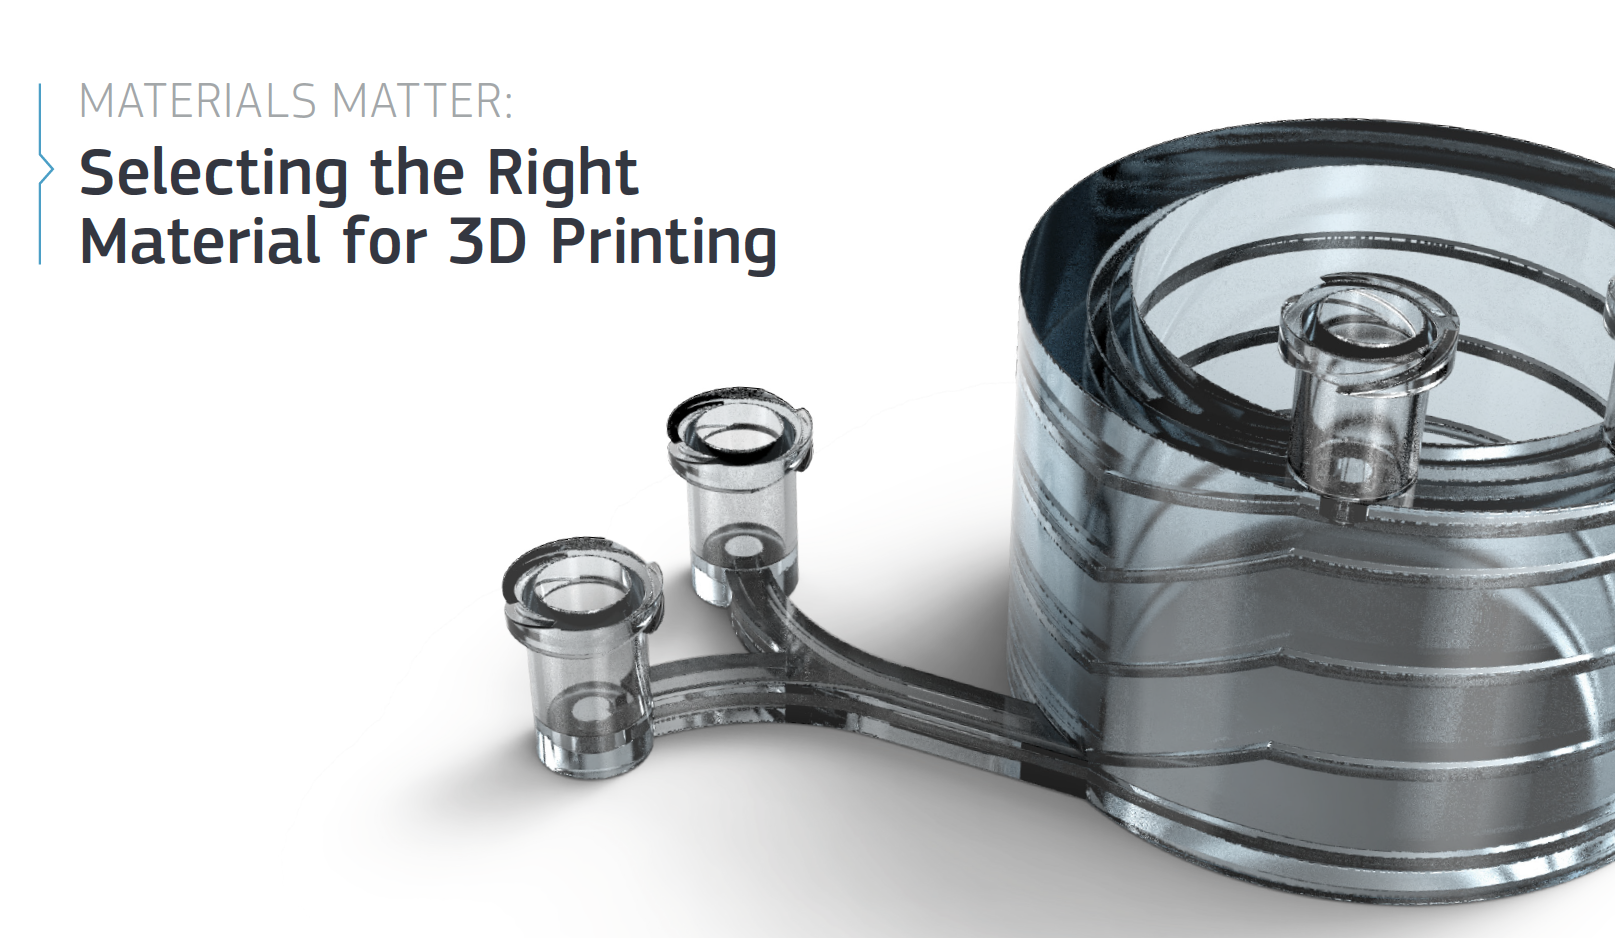 Selecting the right material for 3D printing